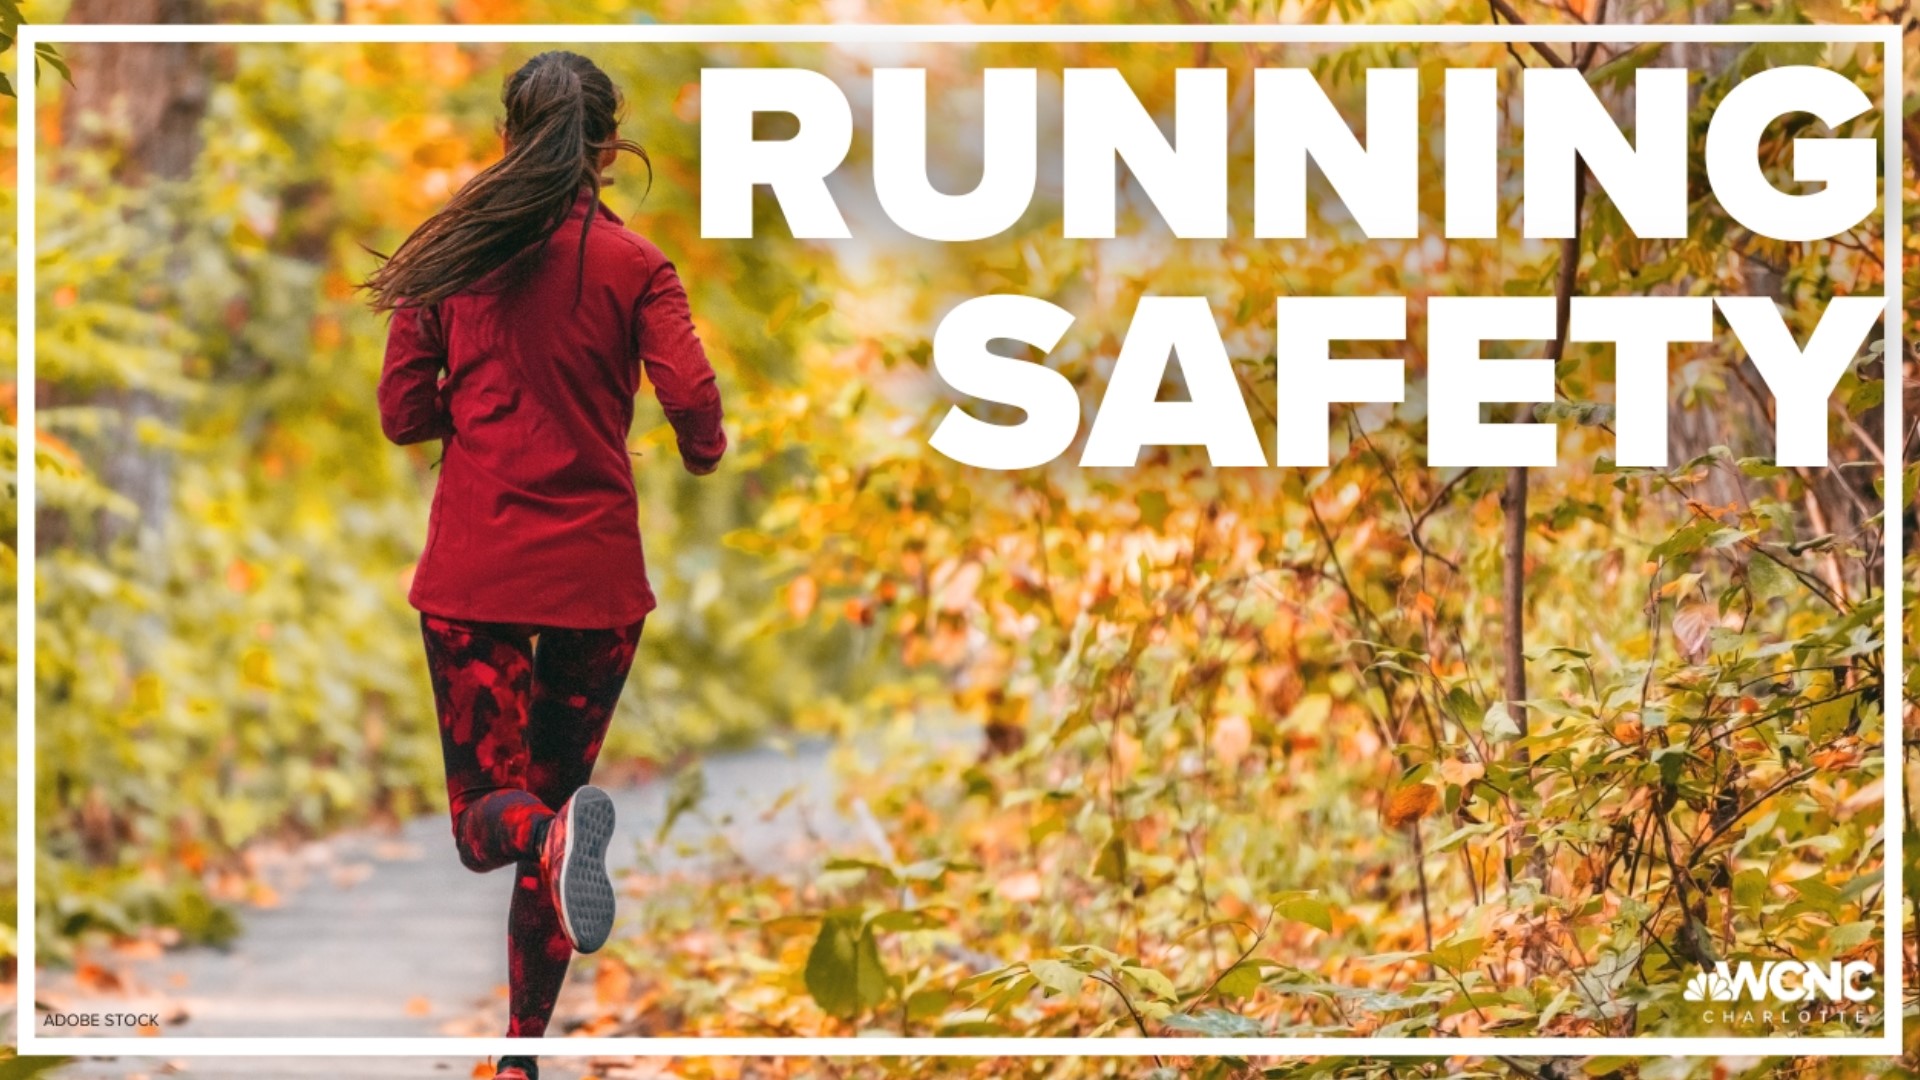 Law enforcement agencies are urging everyone to stay safe on their next run.